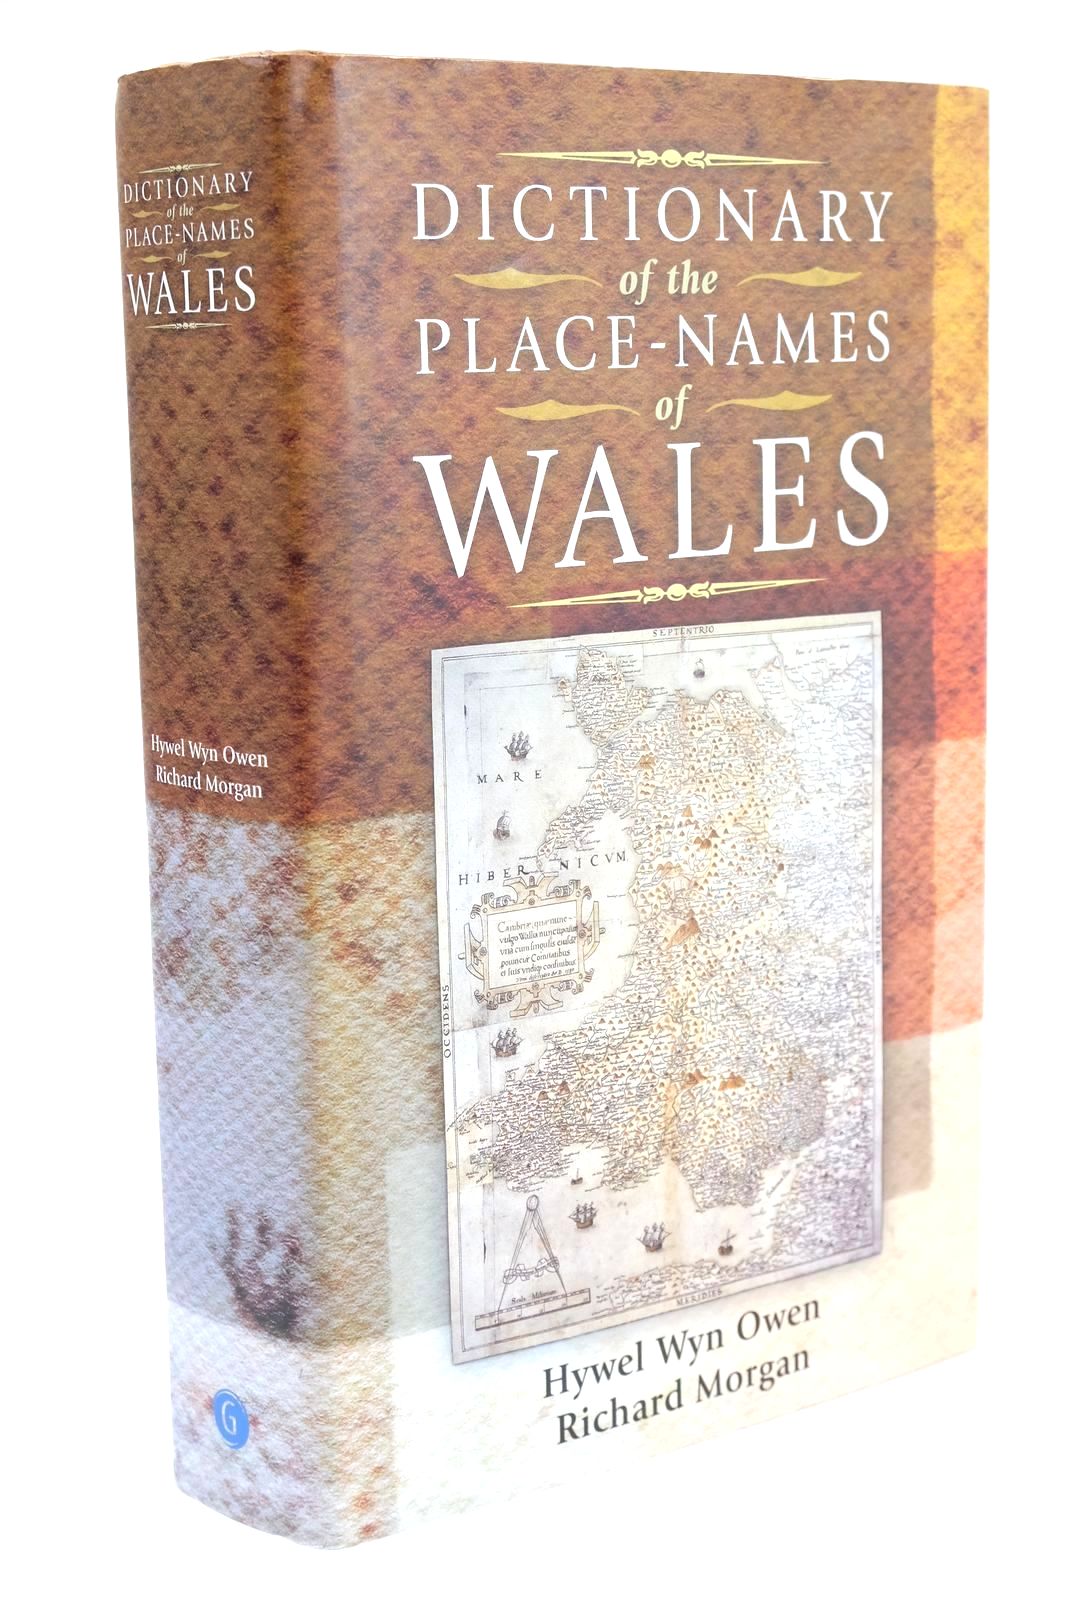 Photo of DICTIONARY OF THE PLACE-NAMES OF WALES written by Owen, Hywel Wyn Morgan, Richard published by Gomer Press (STOCK CODE: 1324736)  for sale by Stella & Rose's Books